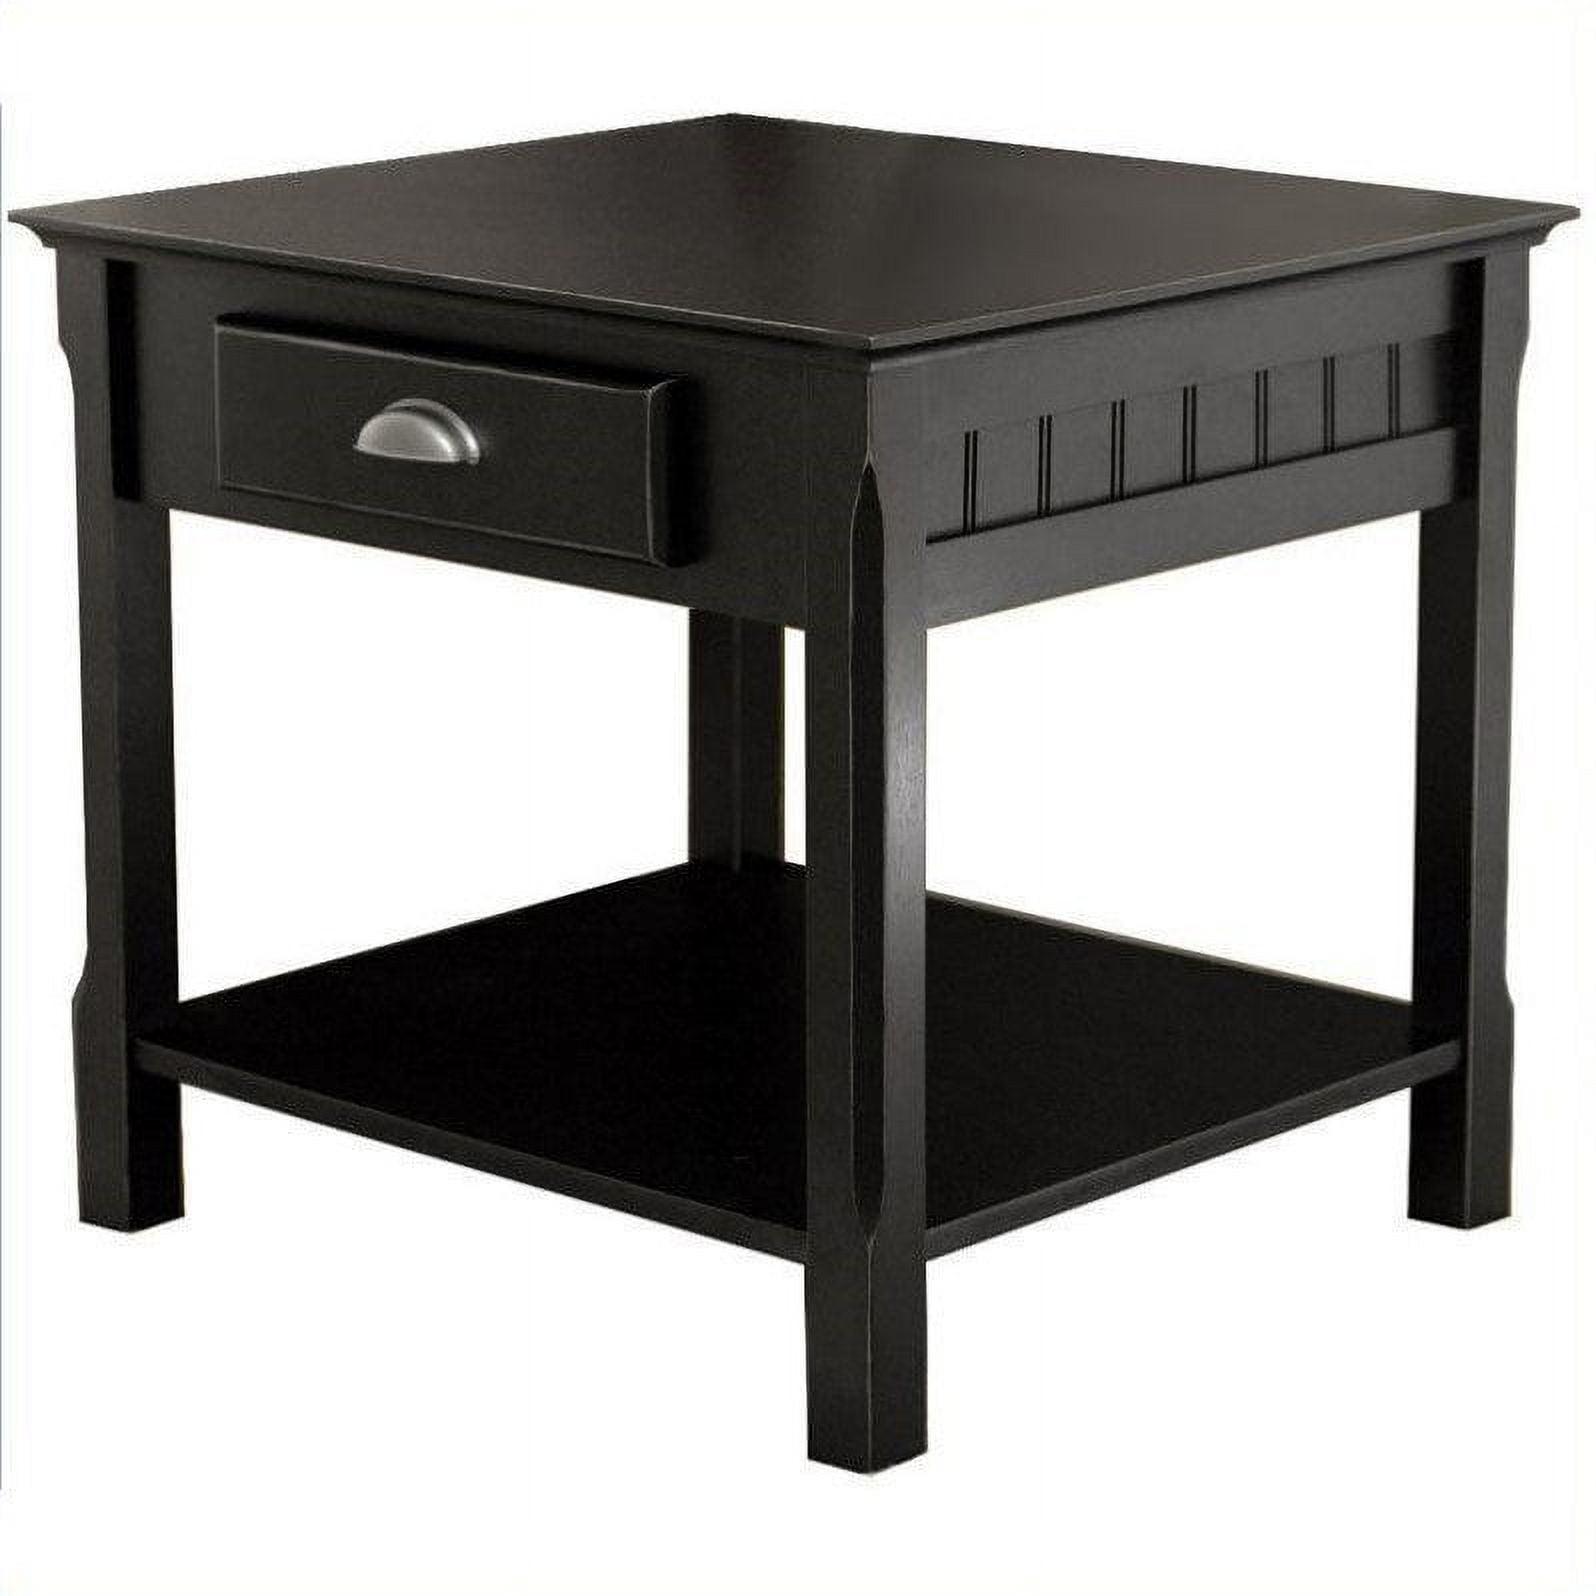 Transitional Timber Black Wood End Table with Drawer and Shelf